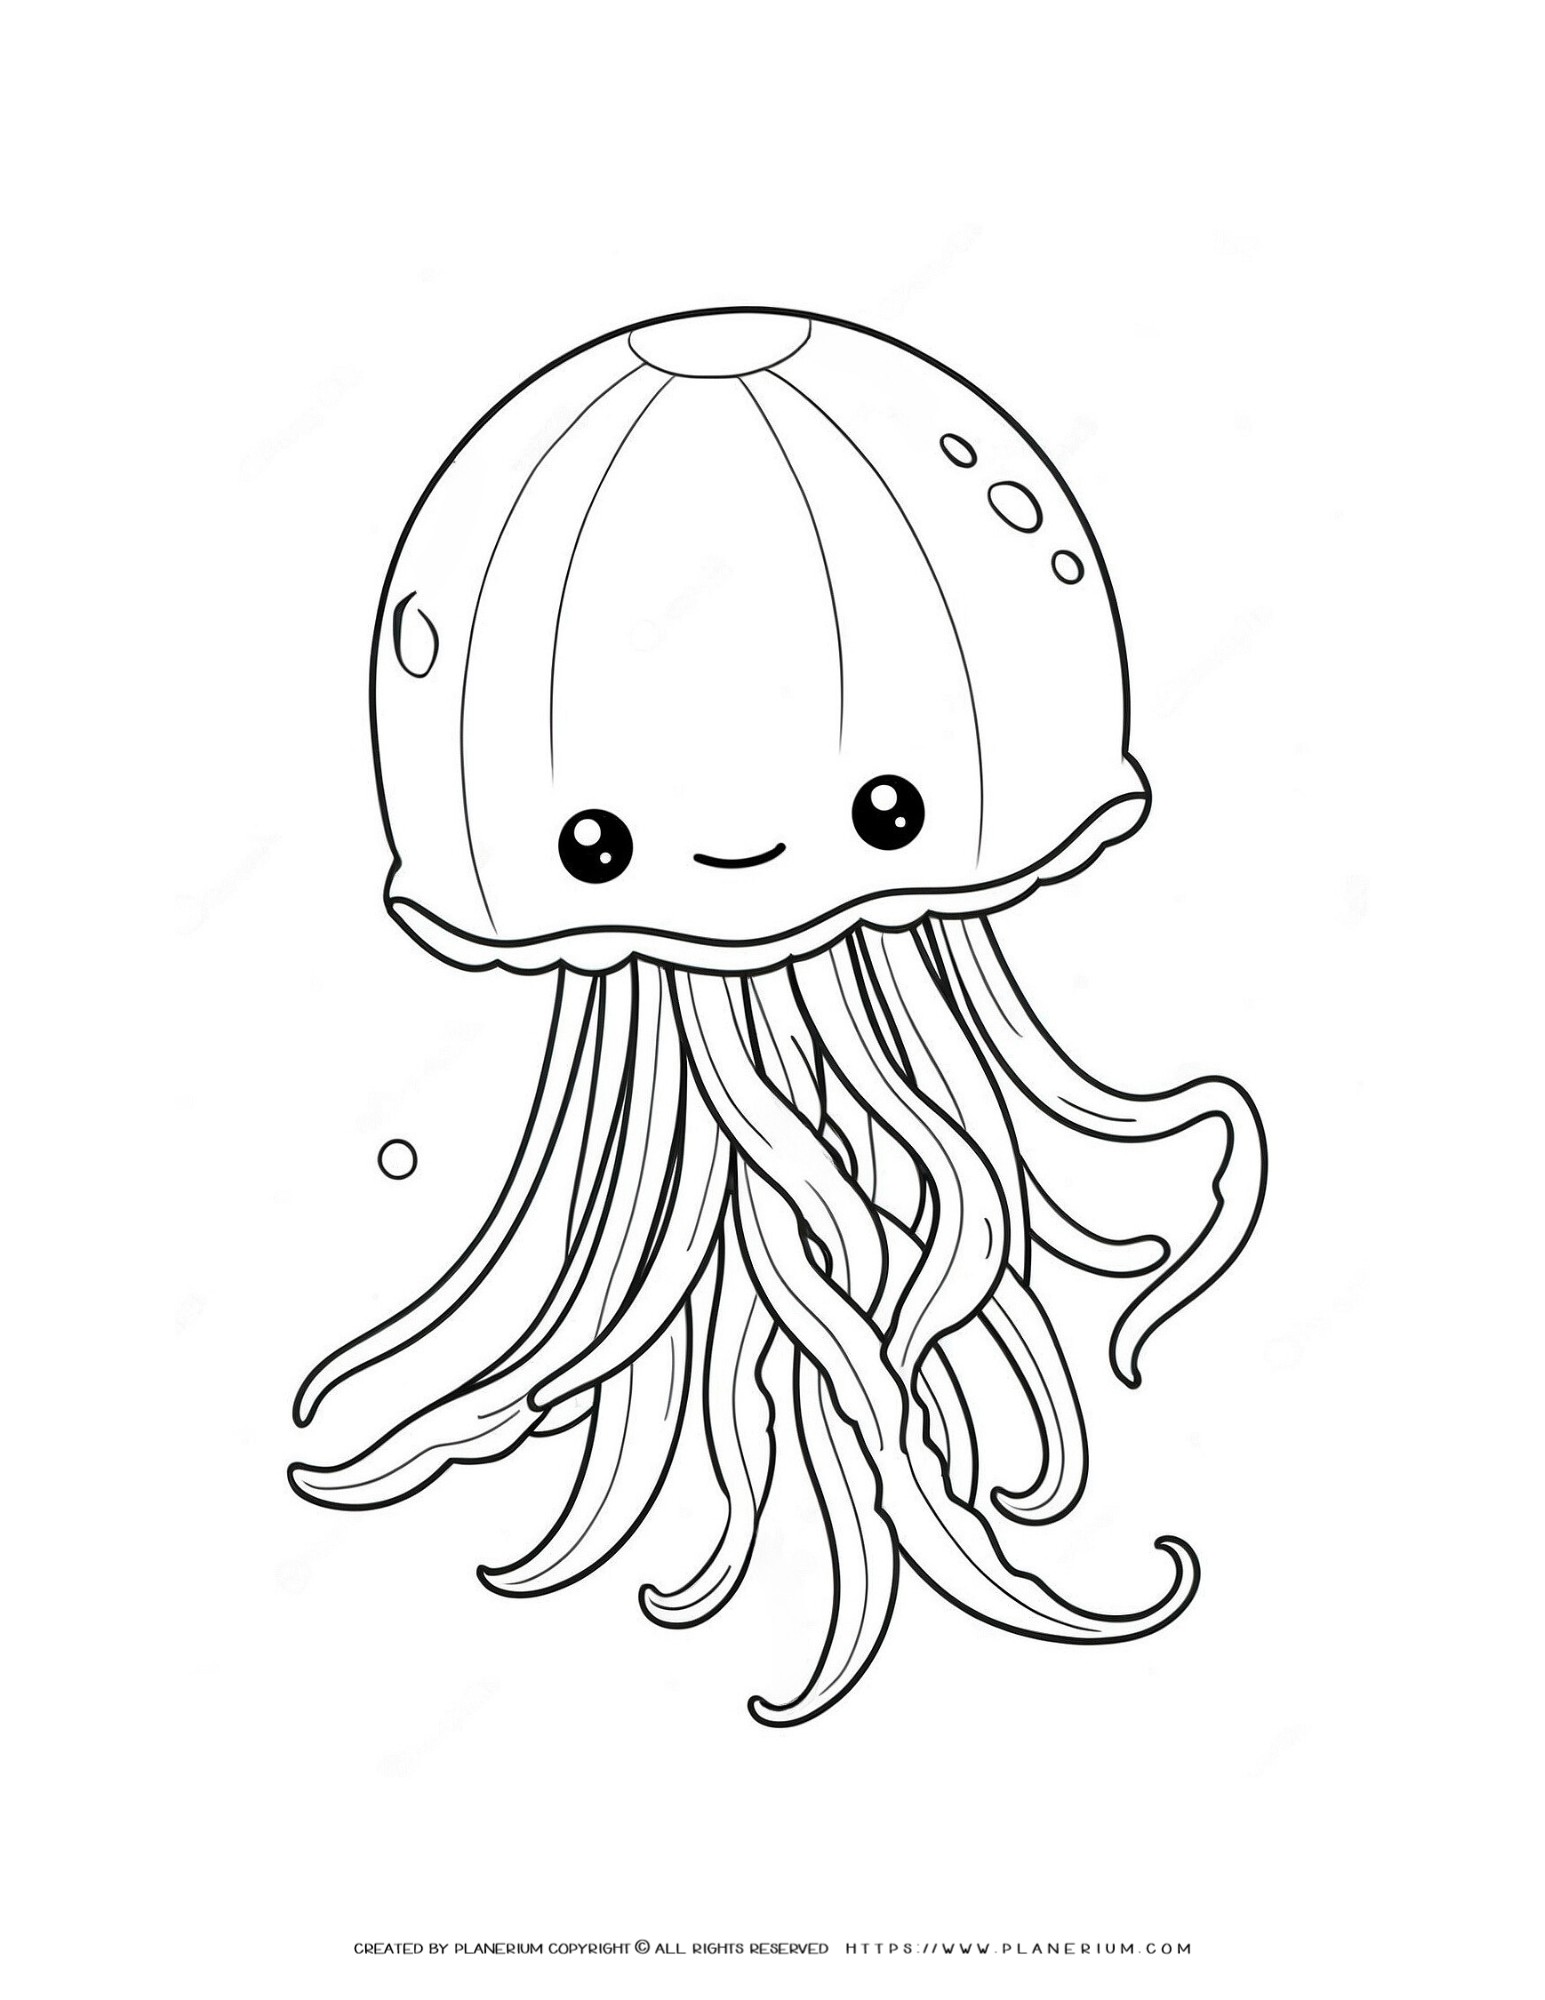 195 Jellyfish Coloring Page Designs: Underwater Beauty in Color 186